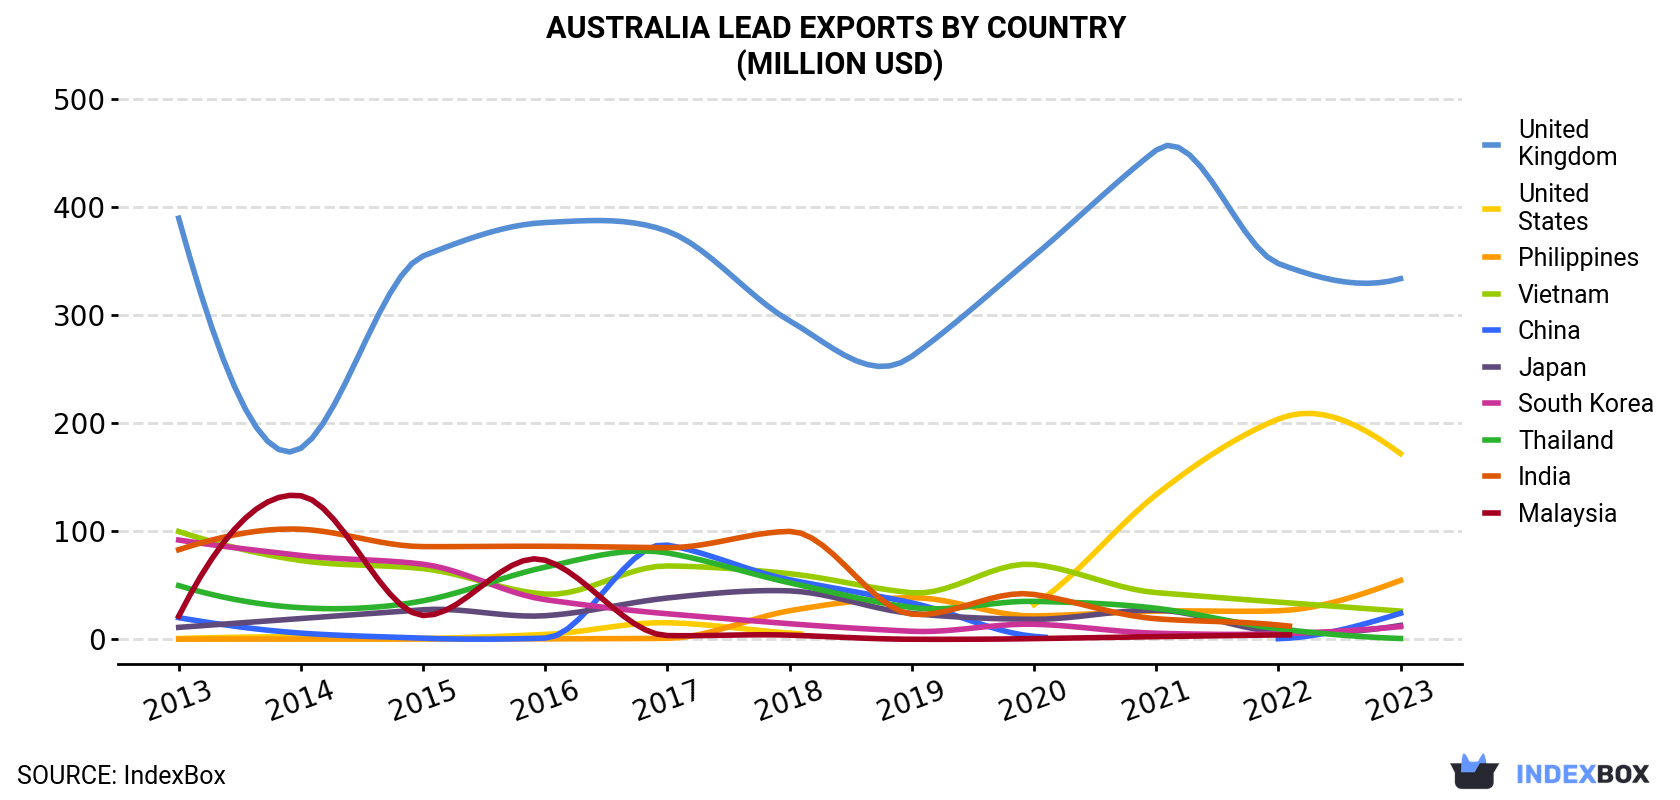 Australia Lead Exports By Country (Million USD)